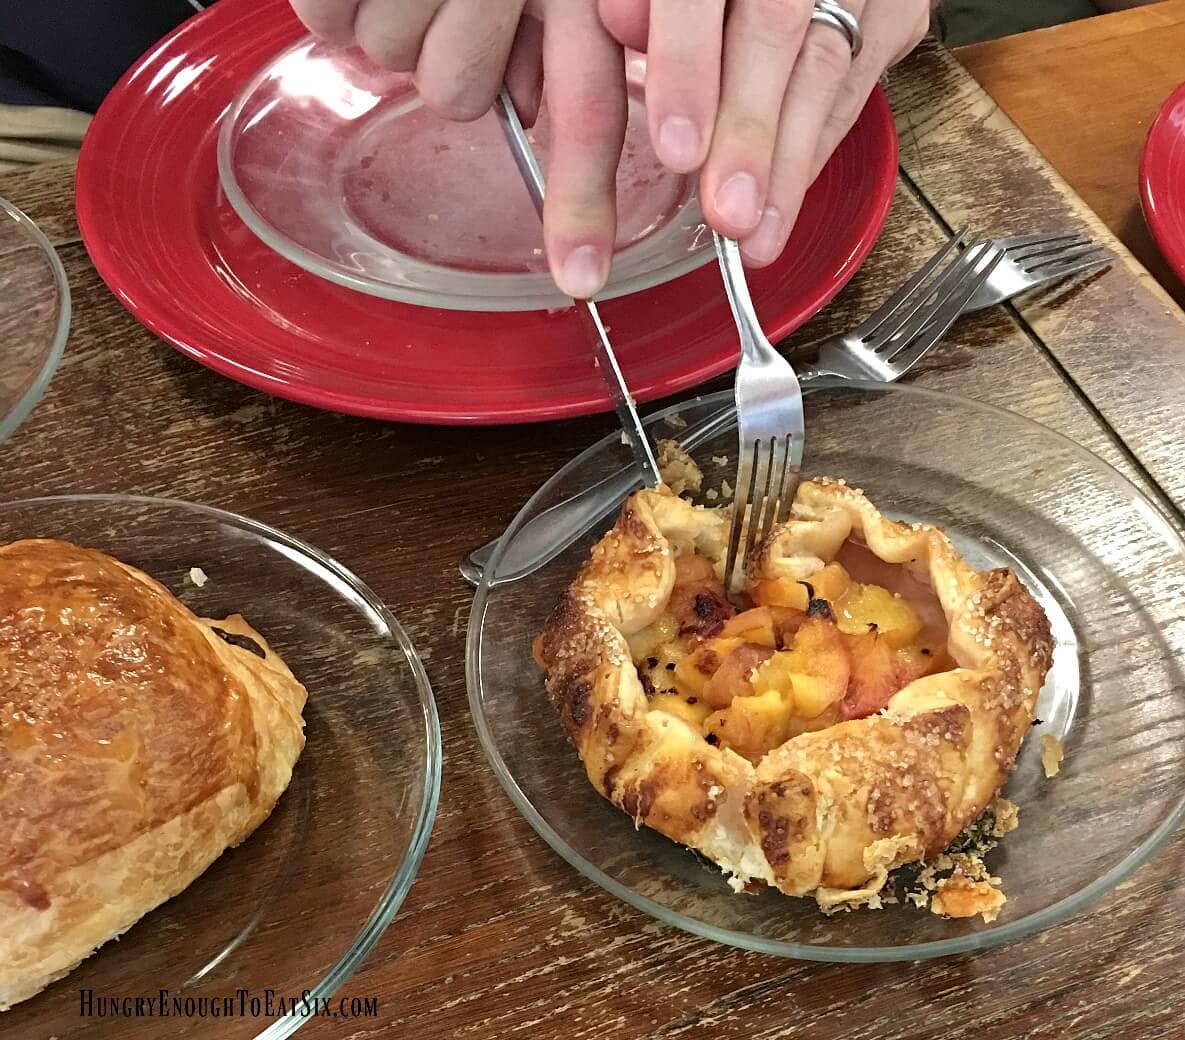 Hands using knife and fork to cut into a mini fruit gallette on a clear plate. 